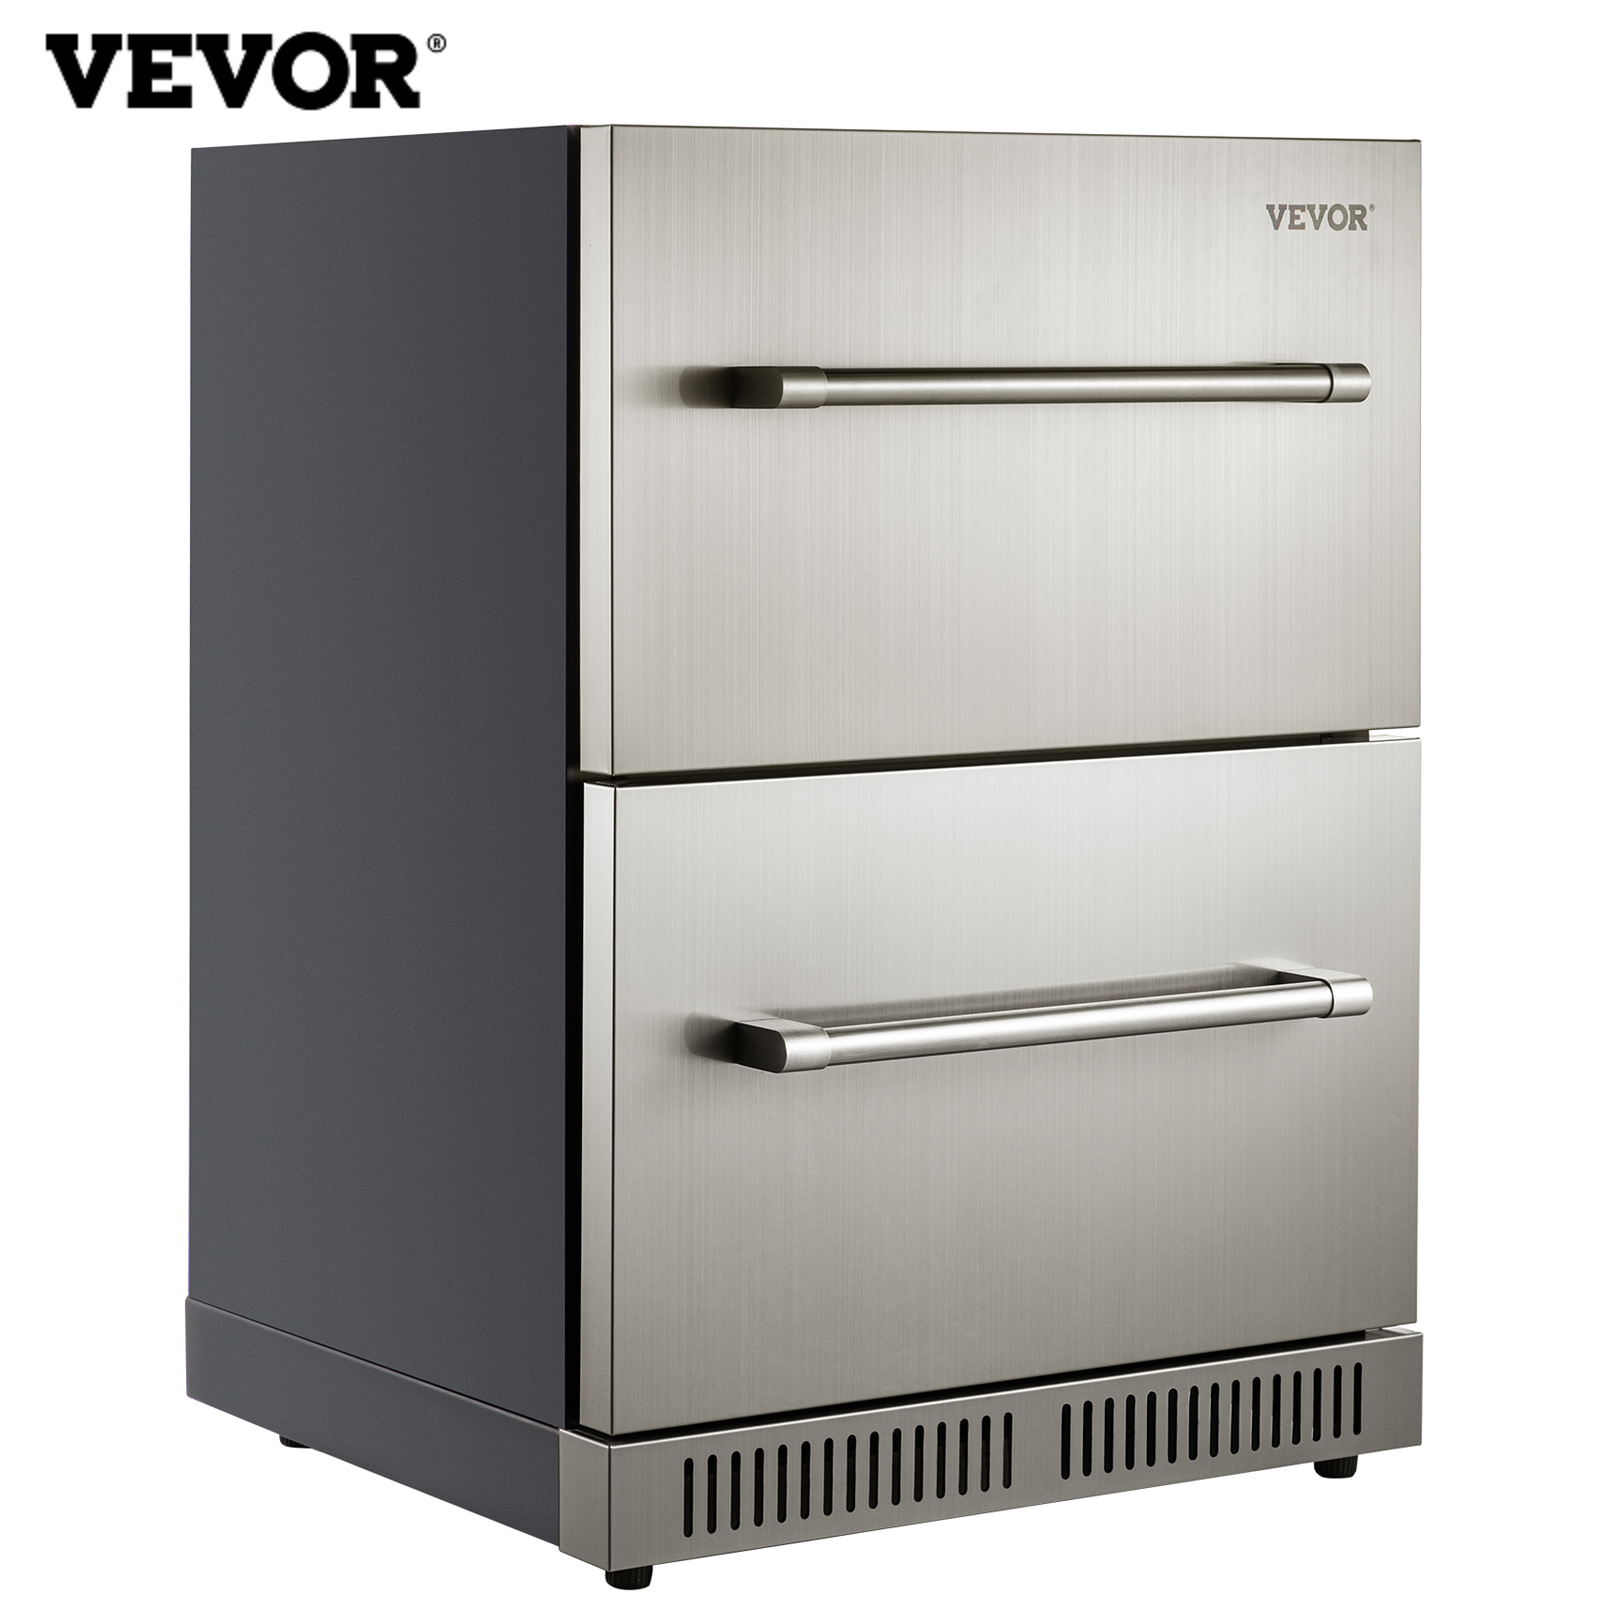 VEVOR 24" Undercounter Built-in Refrigerator 5.12 Cu.ft. Double Drawer Indoor/Outdoor Beverage Fridge with 32-99°F Range, Ventilated Cooling for Home and Commercial Use Stainless Steel, Silver - image 1 of 9